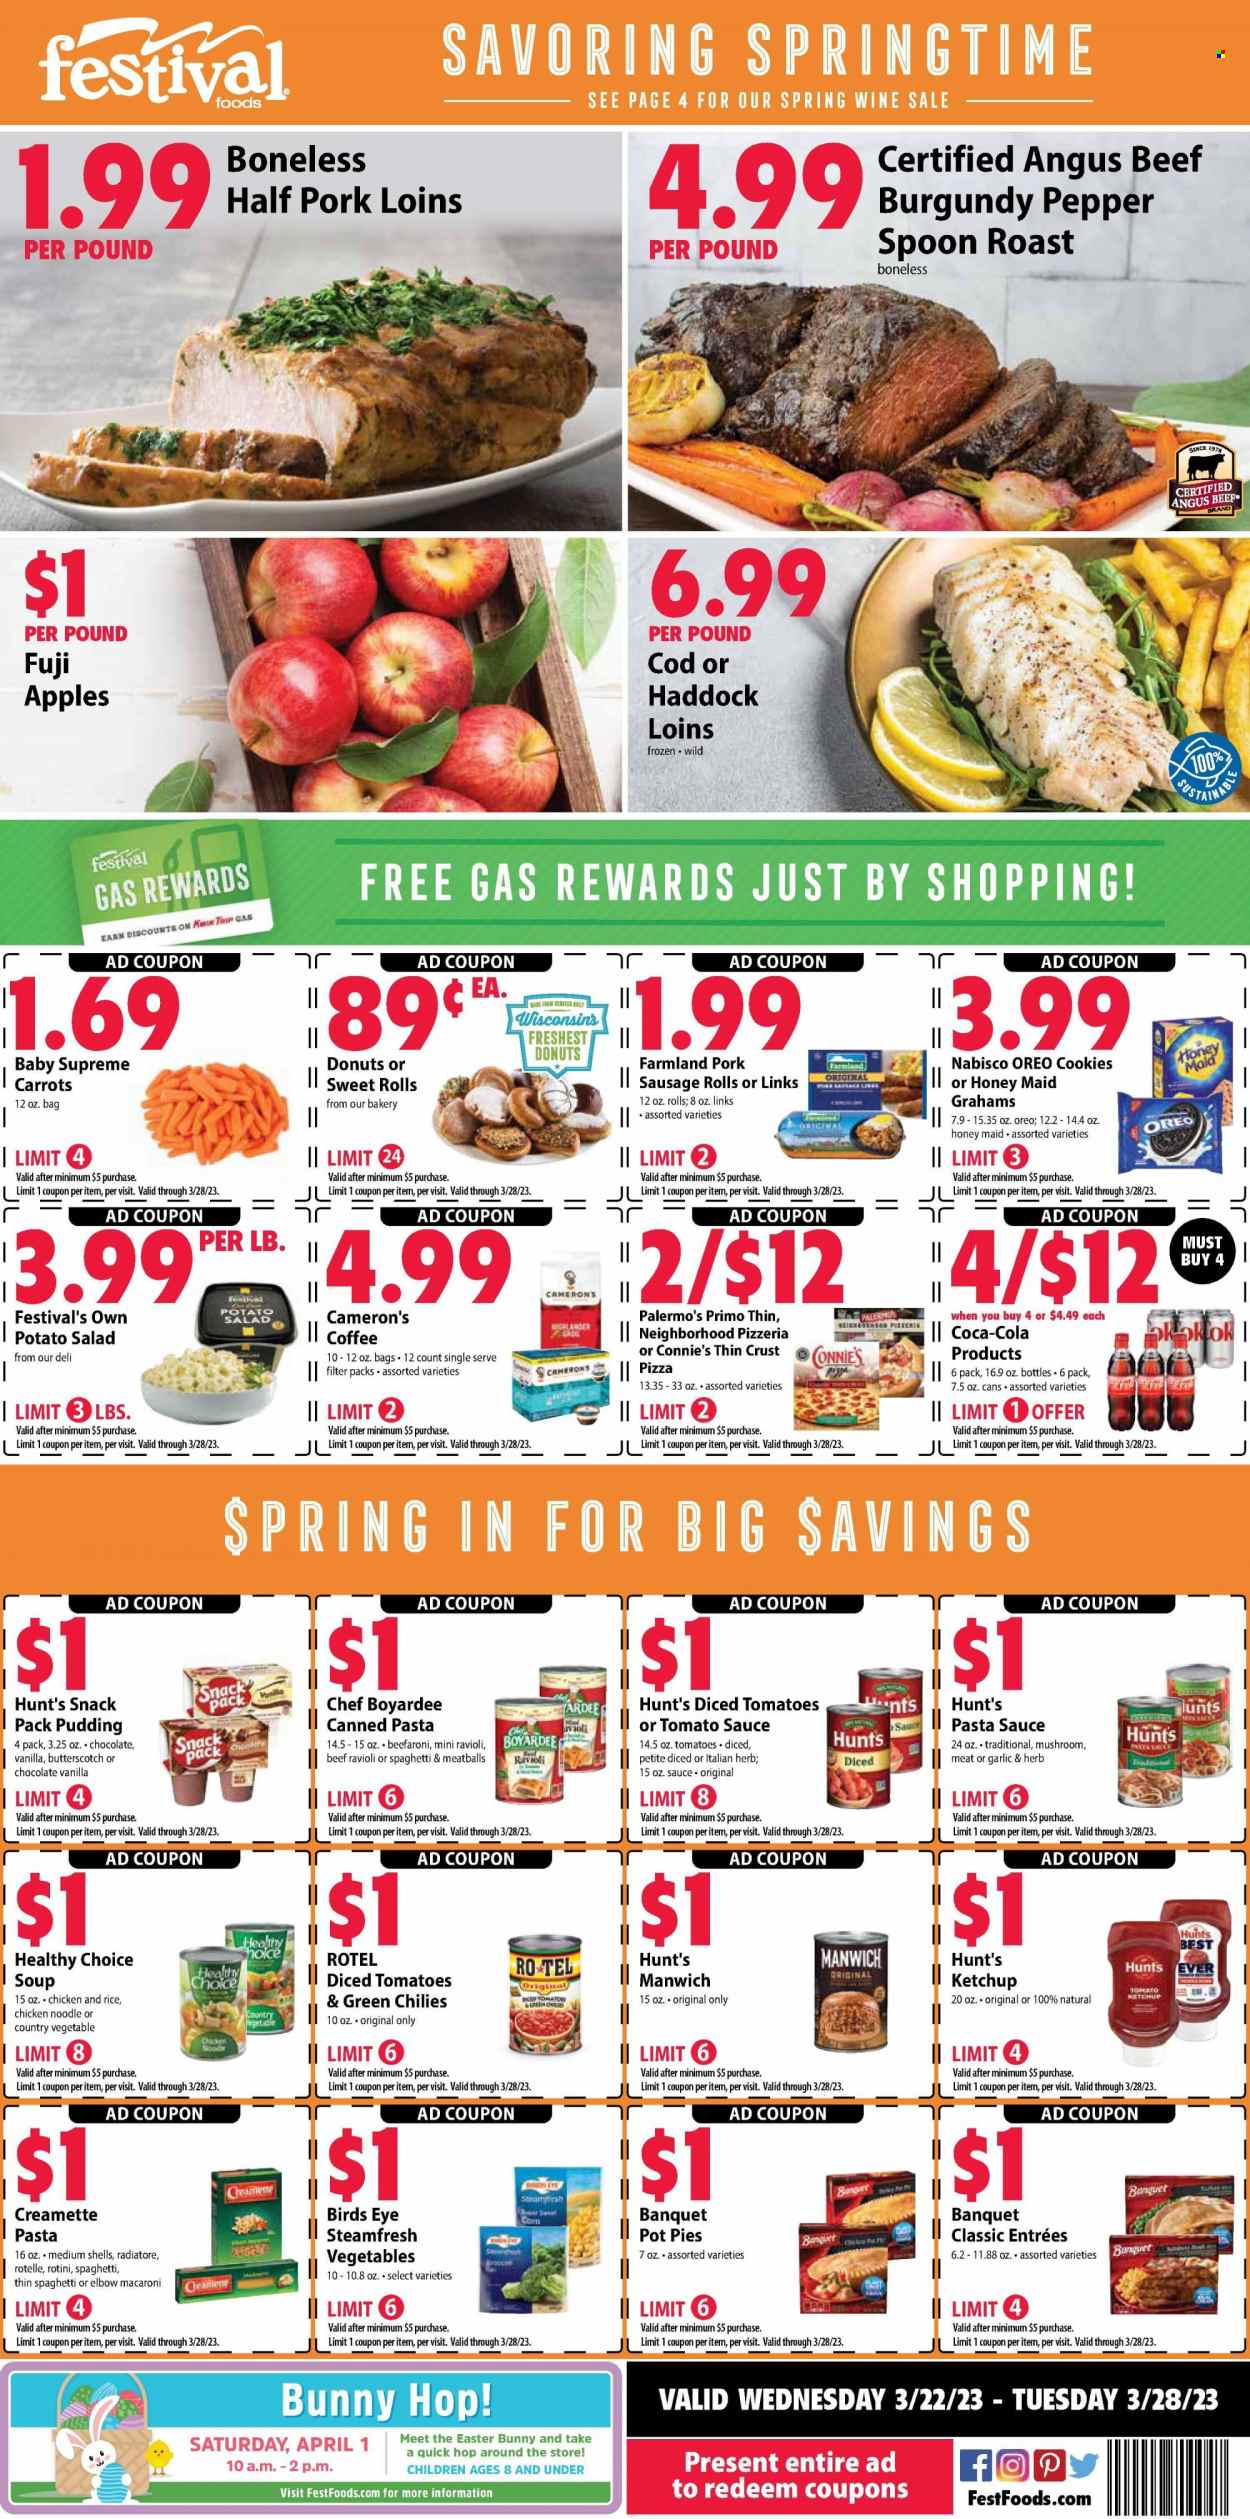 thumbnail - Festival Foods Flyer - 03/22/2023 - 03/28/2023 - Sales products - sausage rolls, pot pie, donut, sweet rolls, carrots, salad, apples, Fuji apple, cod, haddock, ravioli, pizza, pasta sauce, meatballs, macaroni, soup, sauce, Bird's Eye, noodles, Healthy Choice, roast, sausage, pork sausage, potato salad, pudding, Oreo, butterscotch, cookies, easter bunny, tomato sauce, tomatoes & green chilies, Manwich, Chef Boyardee, diced tomatoes, Honey Maid, rice, Creamette, pepper, ketchup, Coca-Cola, coffee, beef meat. Page 1.